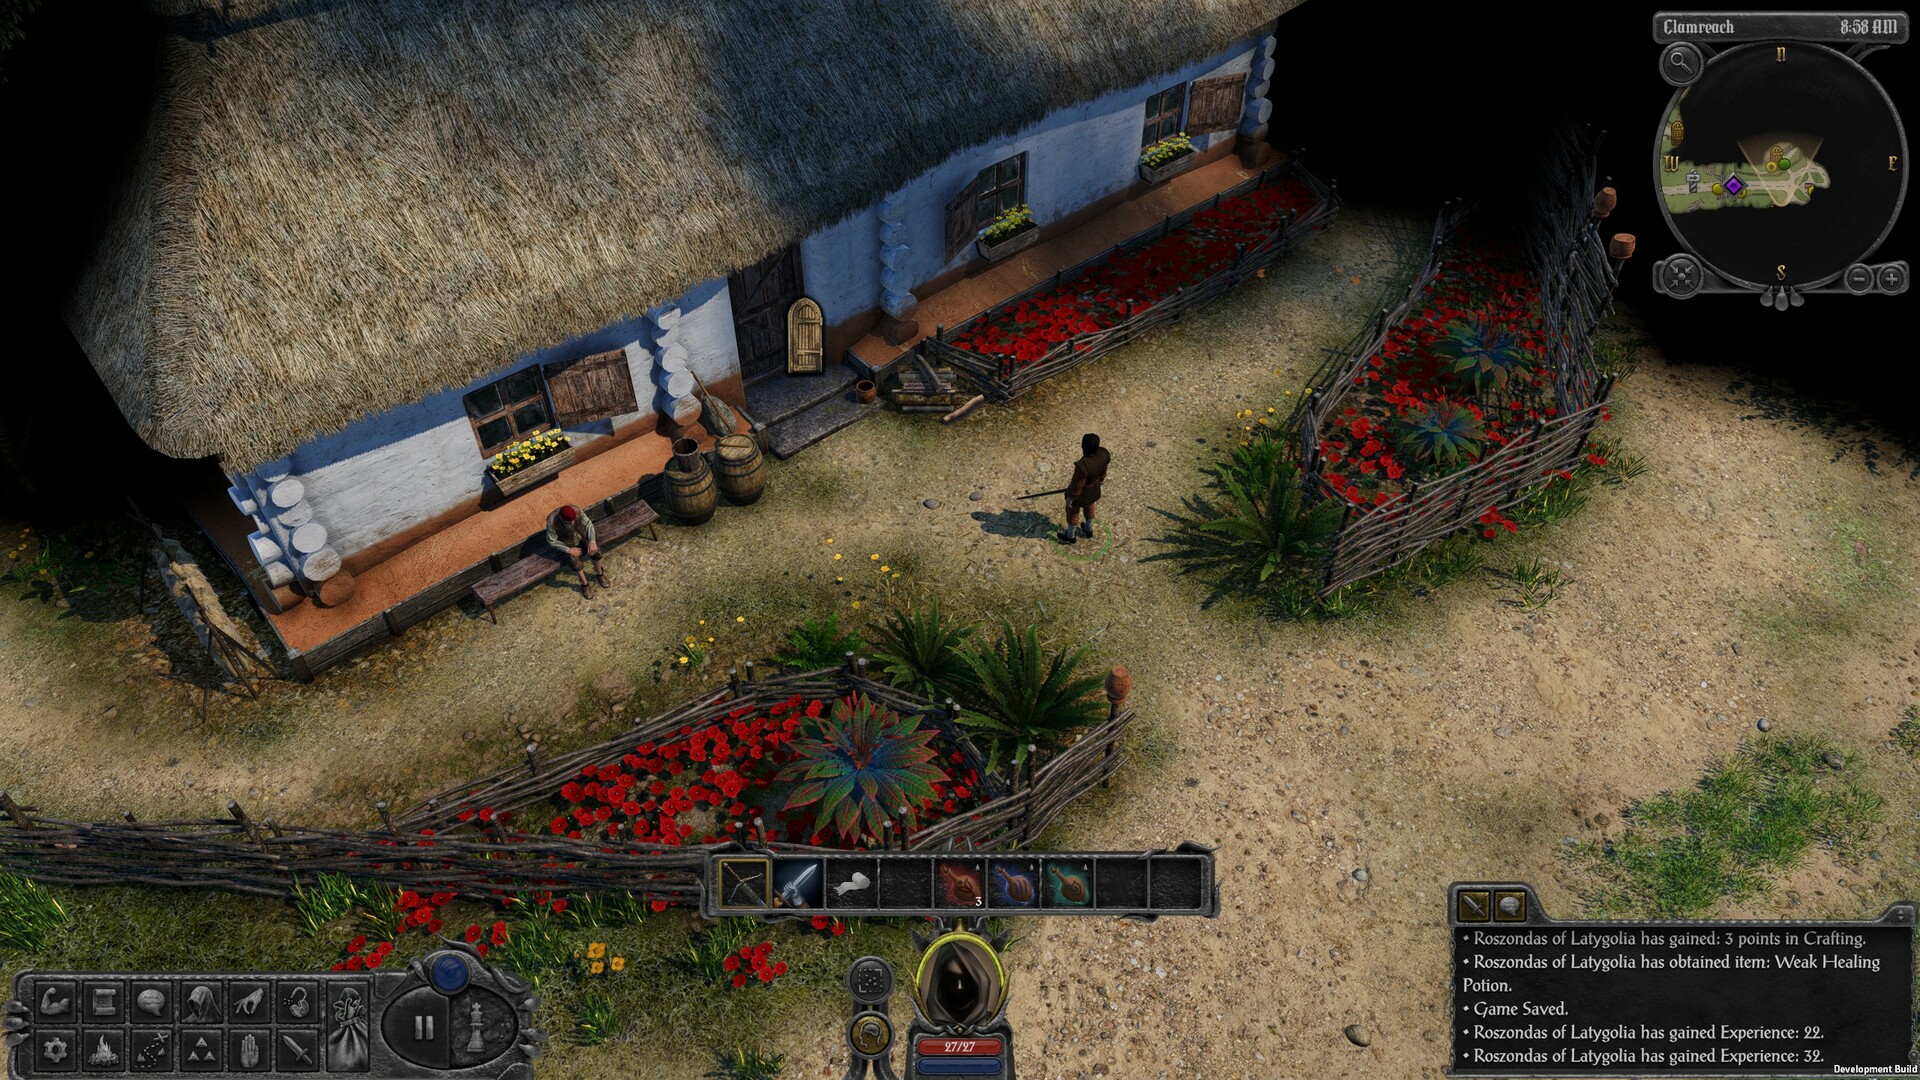 Swordhaven: Iron Conspiracy screenshot - Isometric view of a man standing in front of a quaint house.